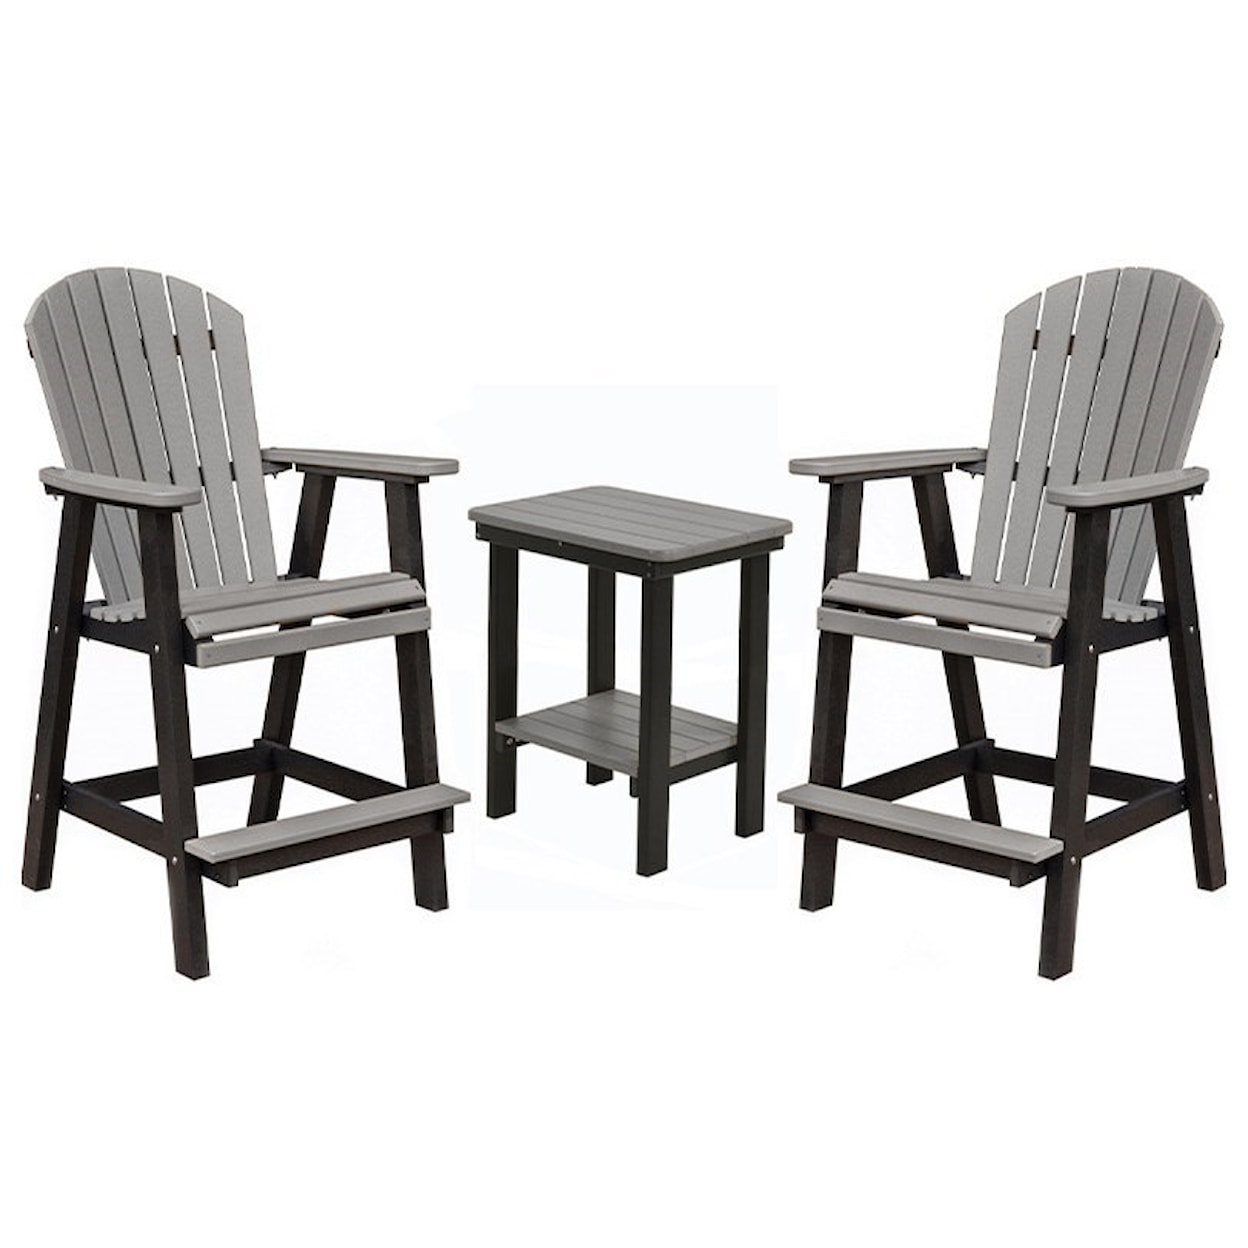 Berlin Gardens Accessories End Table and Chairs Set